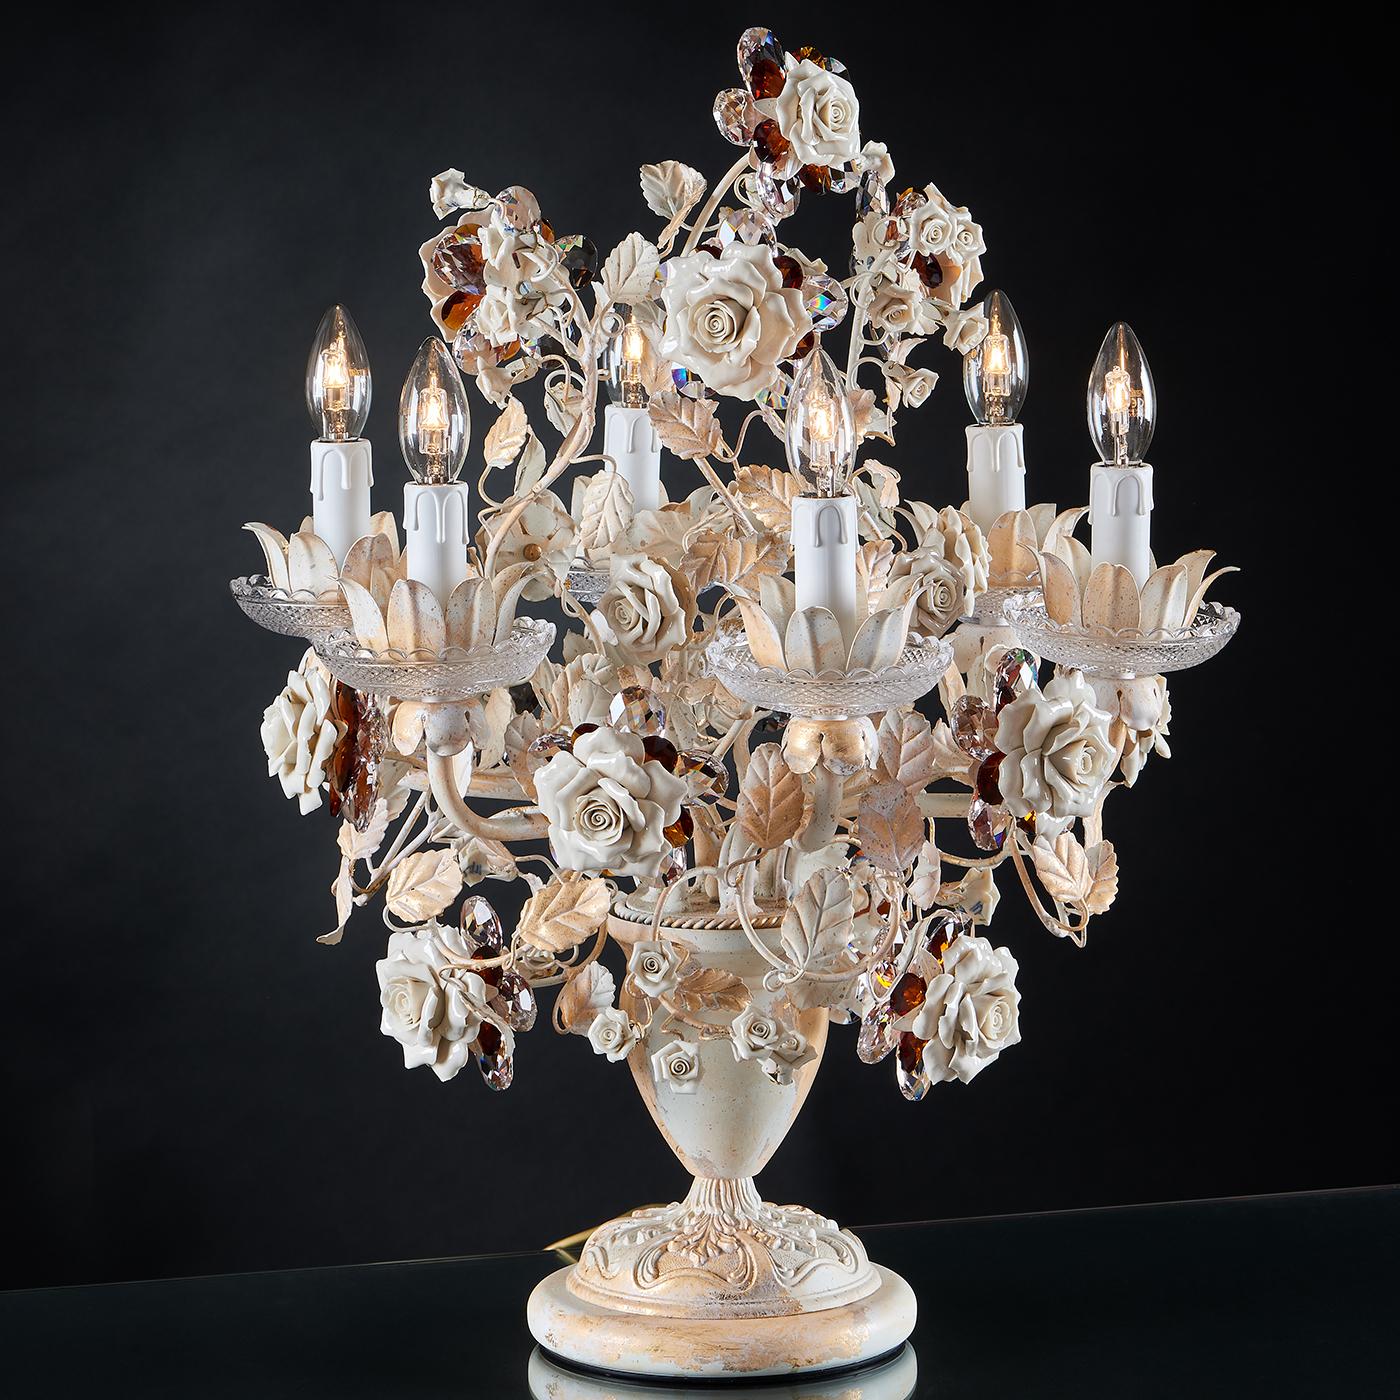 A table lamp in white hand-decorated metal with gold leaf inserts, two-tone crystal ornaments, and roses entirely made in Capodimonte porcelain. It is an extremely detailed piece, and combined with the fact that this piece is unique and it can't be